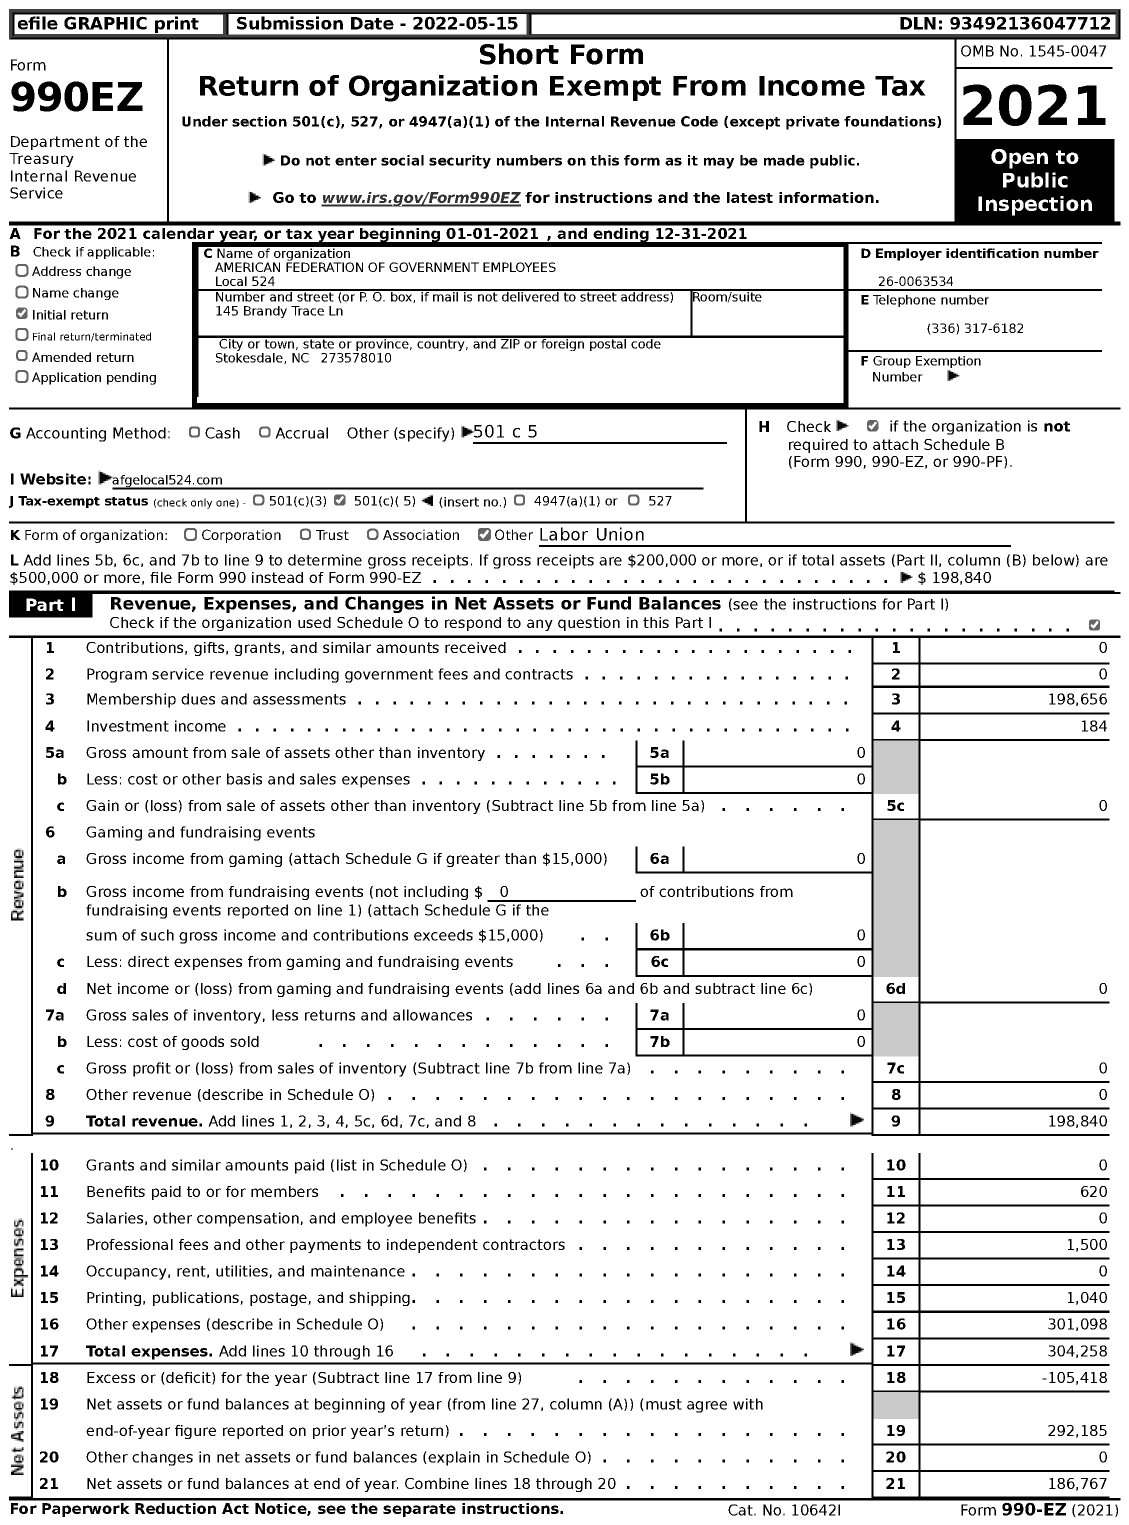 Image of first page of 2021 Form 990EZ for AMERICAN FEDERATION OF GOVERNMENT EMPLOYEES - 0524 Afge Local